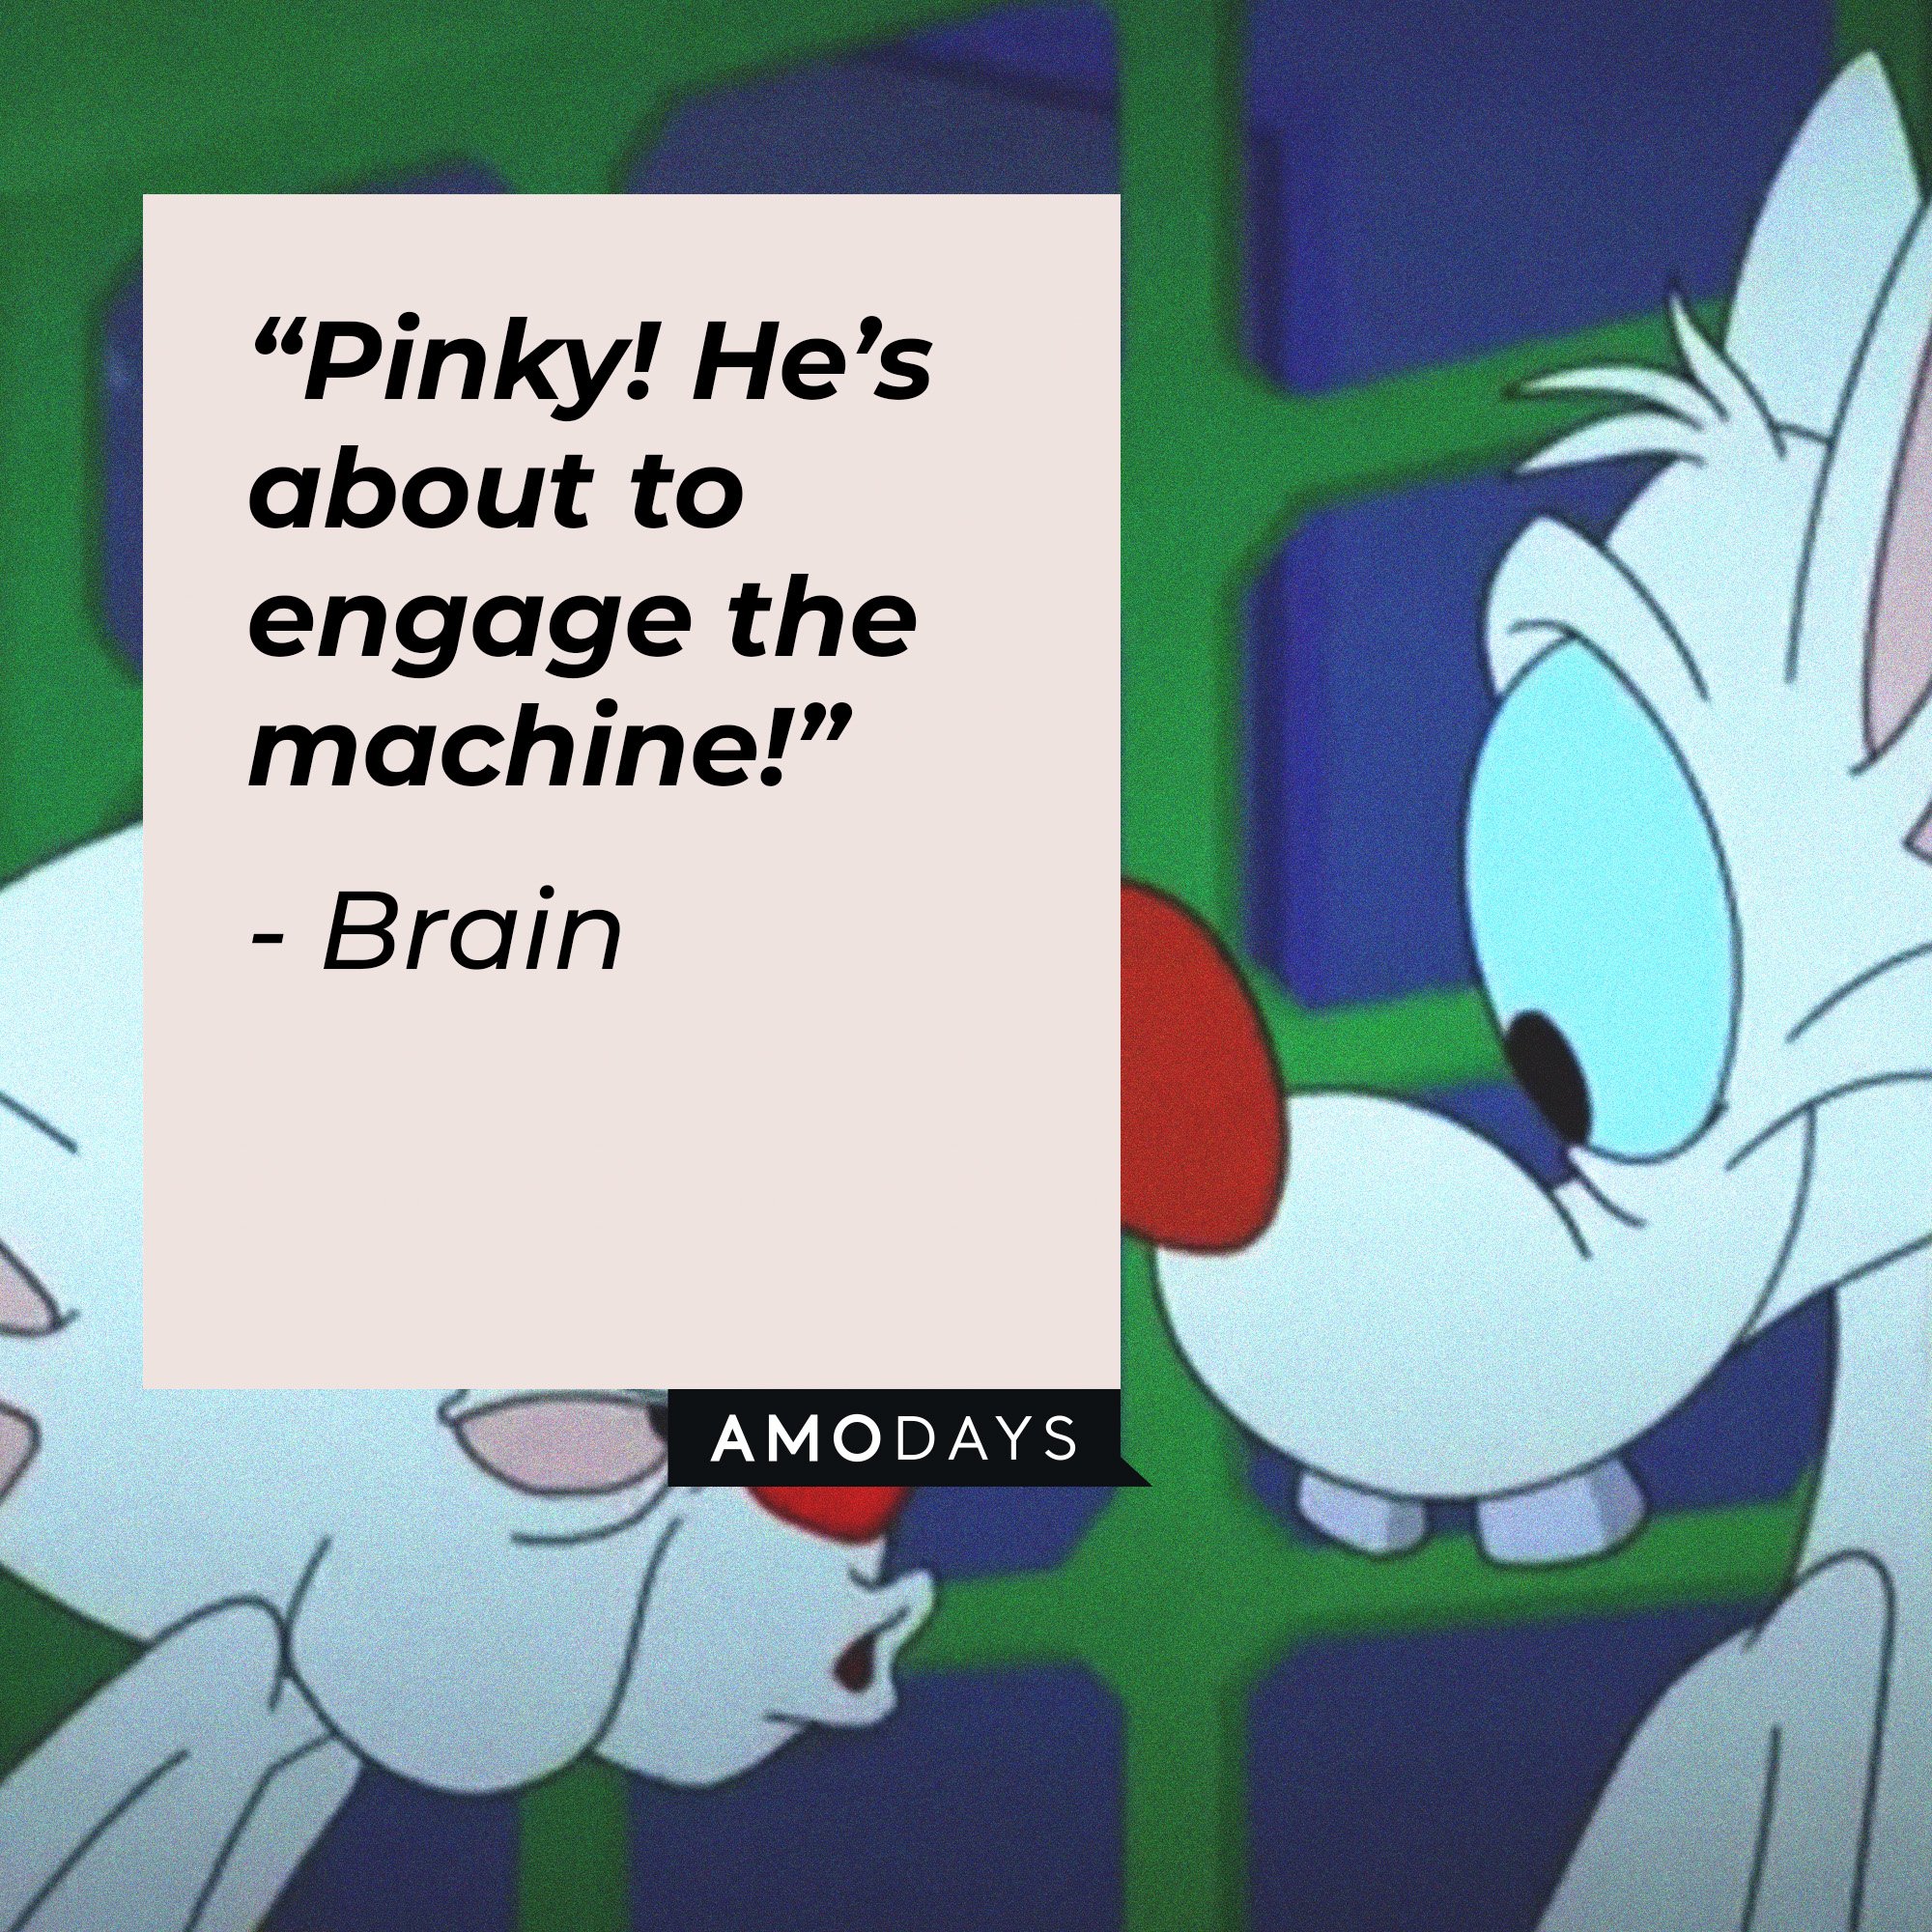  Brain's quote: “Pinky! He’s about to engage the machine!” | Image: AmoDays 